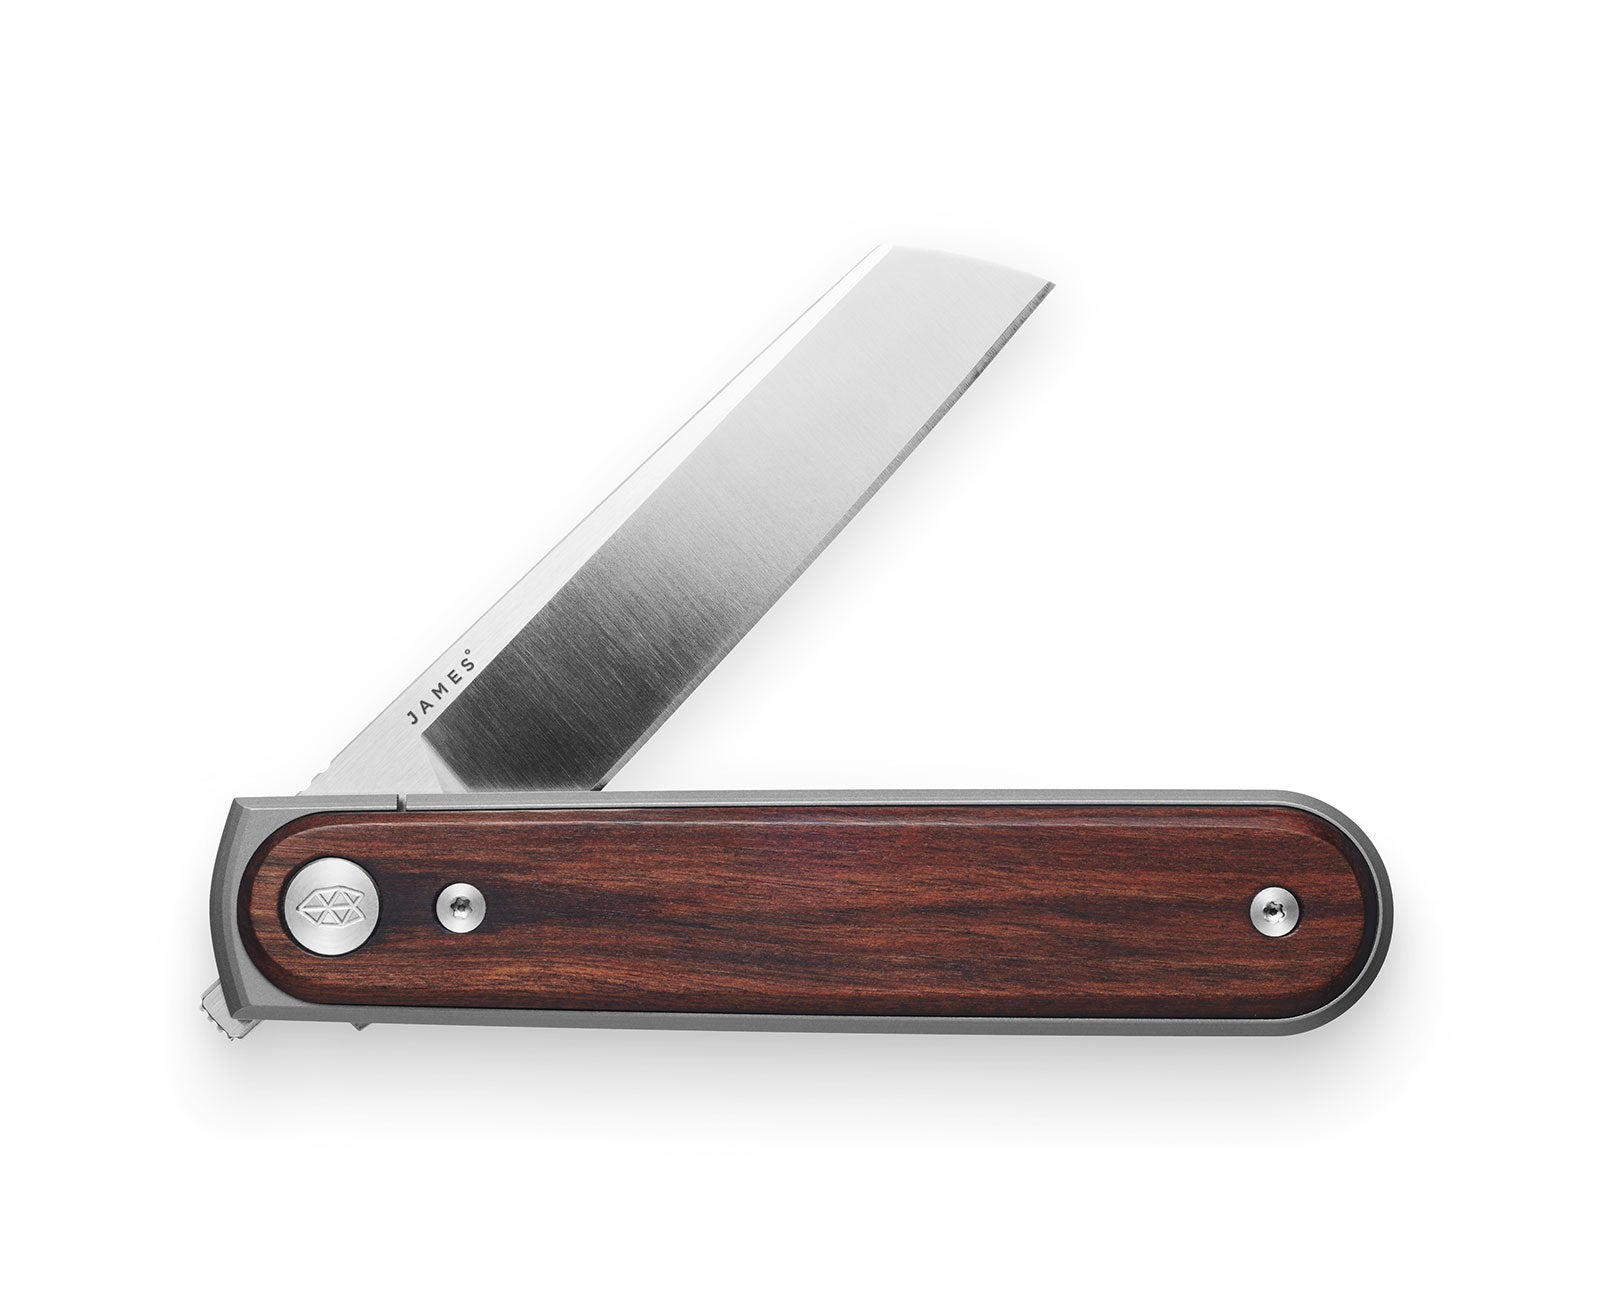 The Duval knife with rosewood handle and stainless steel blade.